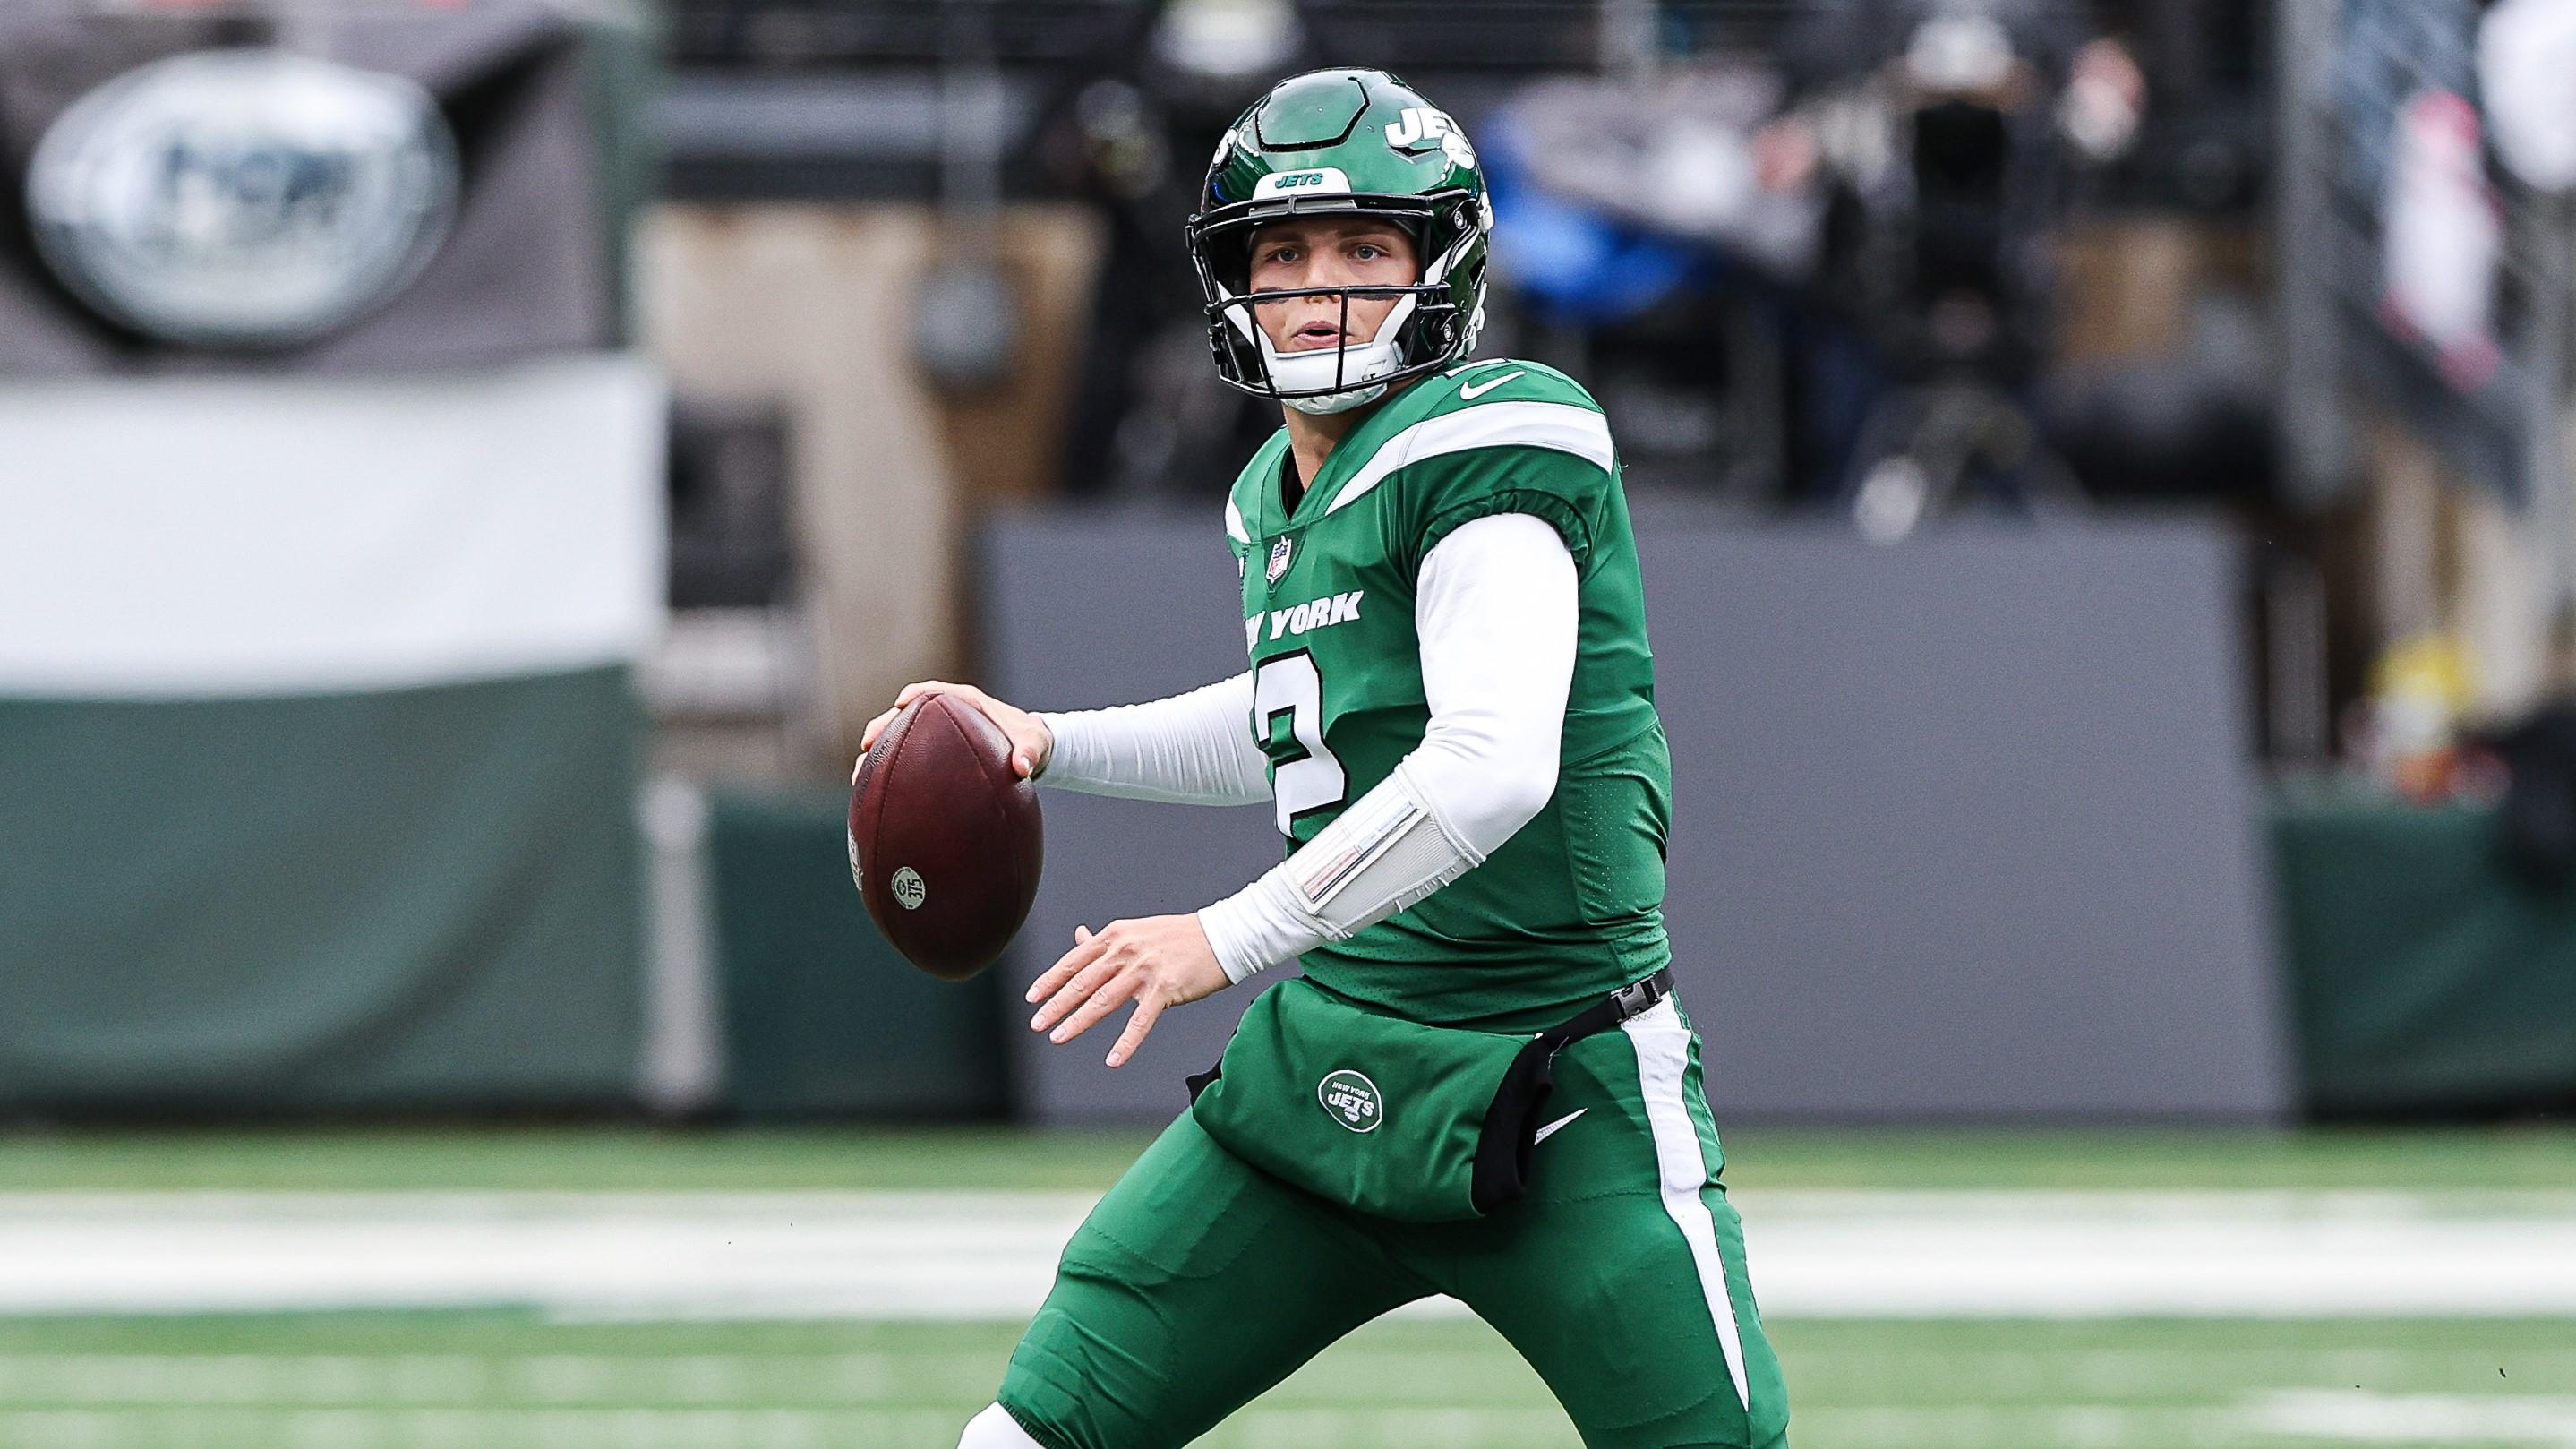 Jan 2, 2022; East Rutherford, New Jersey, USA; New York Jets quarterback Zach Wilson (2) throws the ball against the Tampa Bay Buccaneers during the first half at MetLife Stadium. Mandatory Credit: Vincent Carchietta-USA TODAY Sports / Vincent Carchietta-USA TODAY Sports